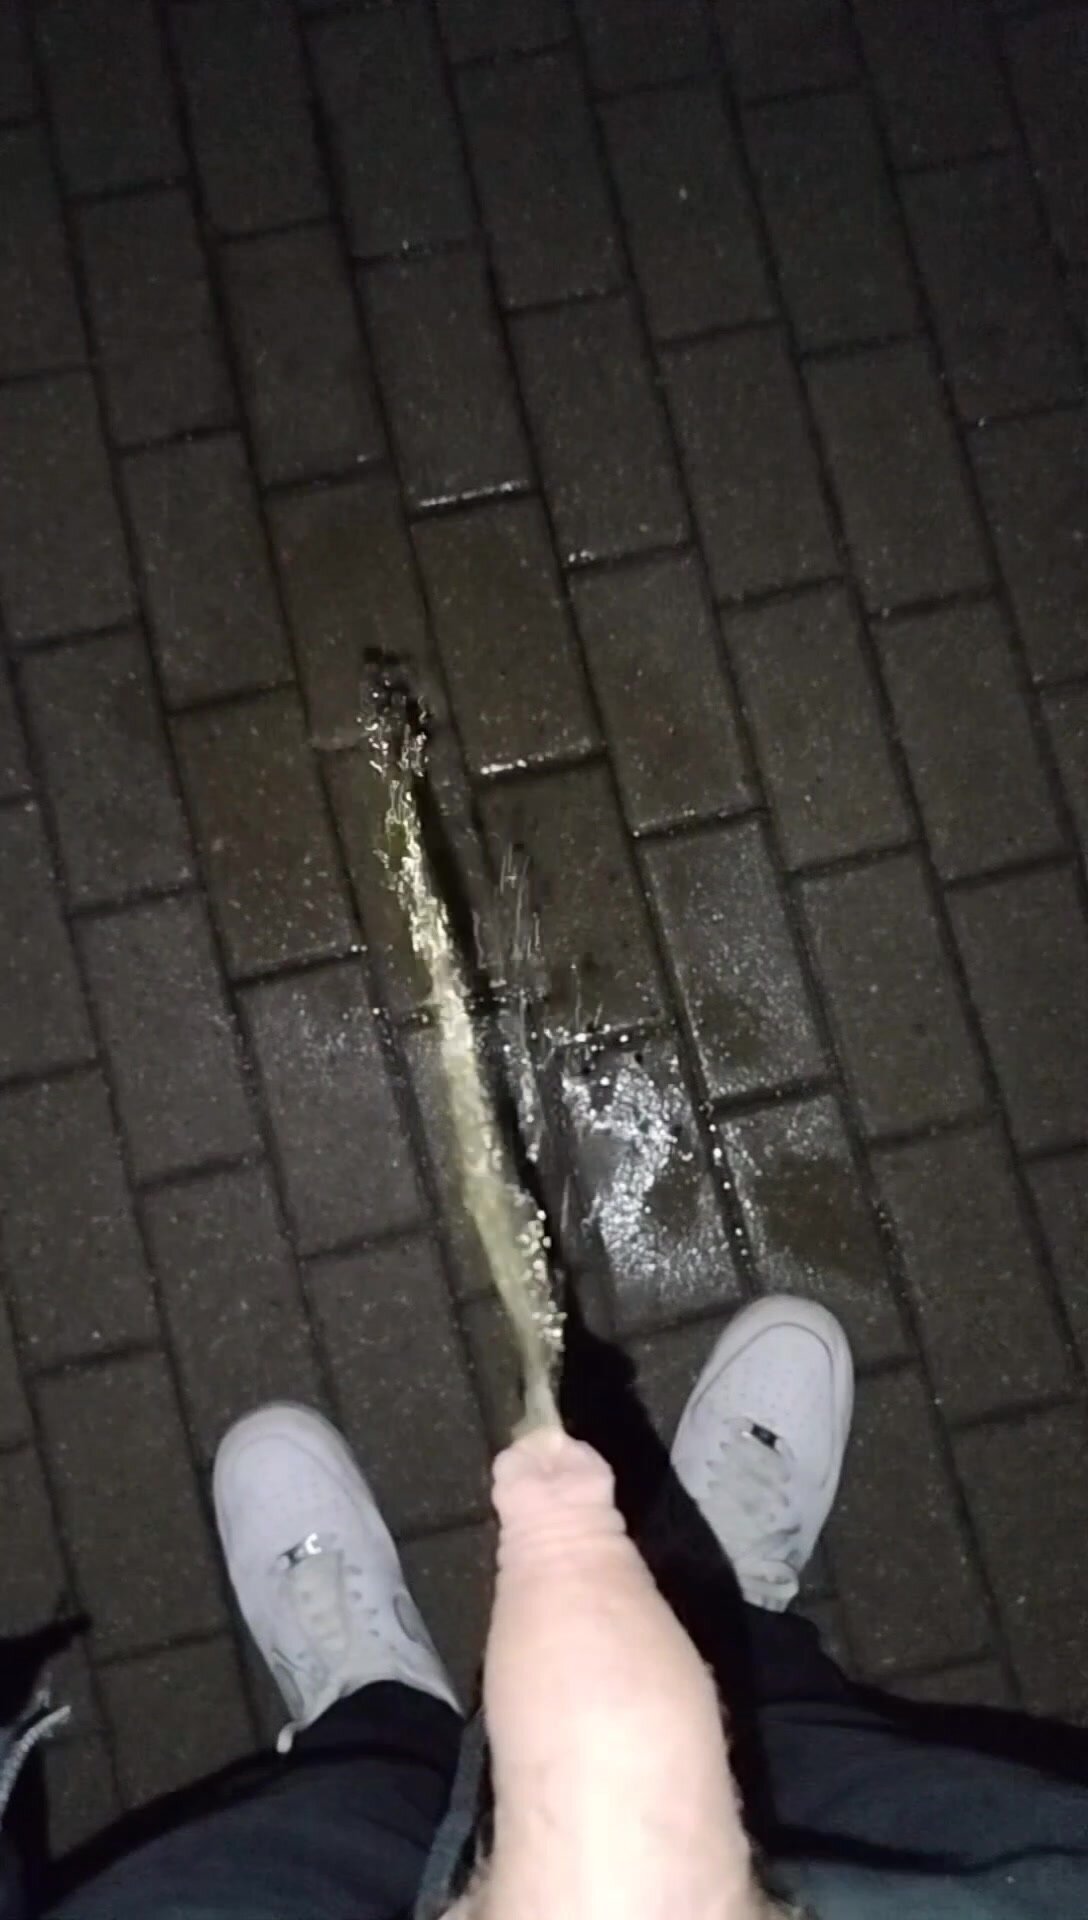 Flaccid penis pissing on the sidewalk at night